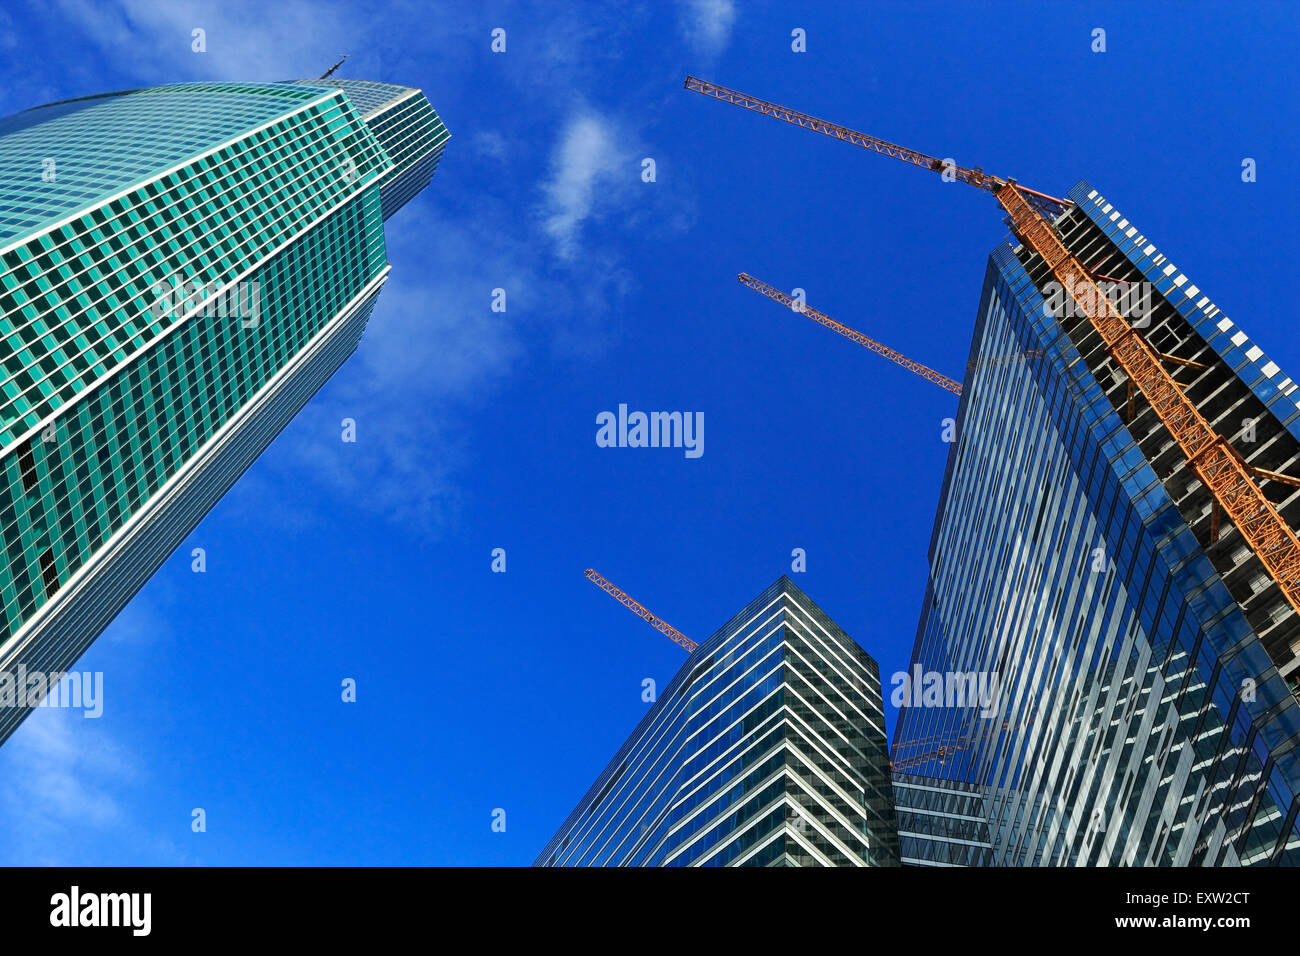 Uncompleted high-rise buildings with cranes against blue sky. Stock Photo